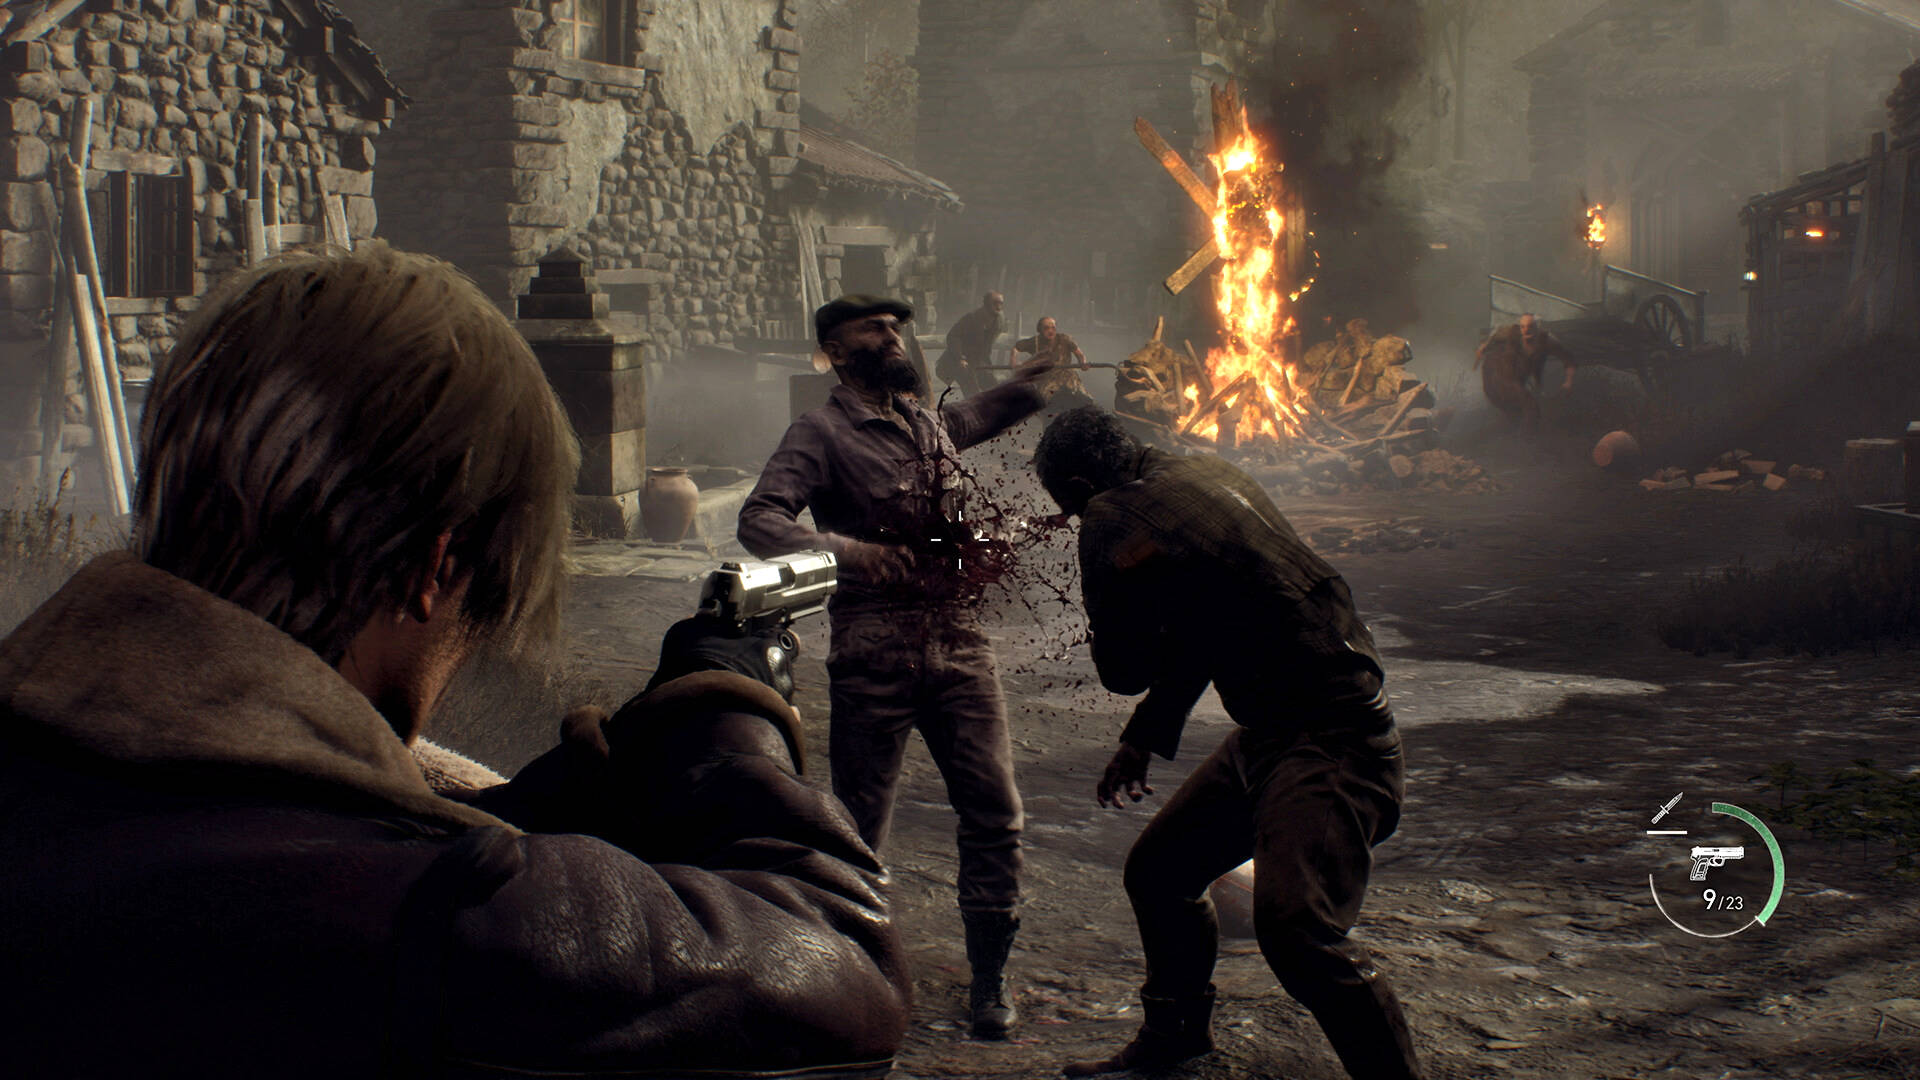 PC games of the year 2023: Resident Evil 4's iconic village battle scene, with Leon firing his pistol at incoming enemies.